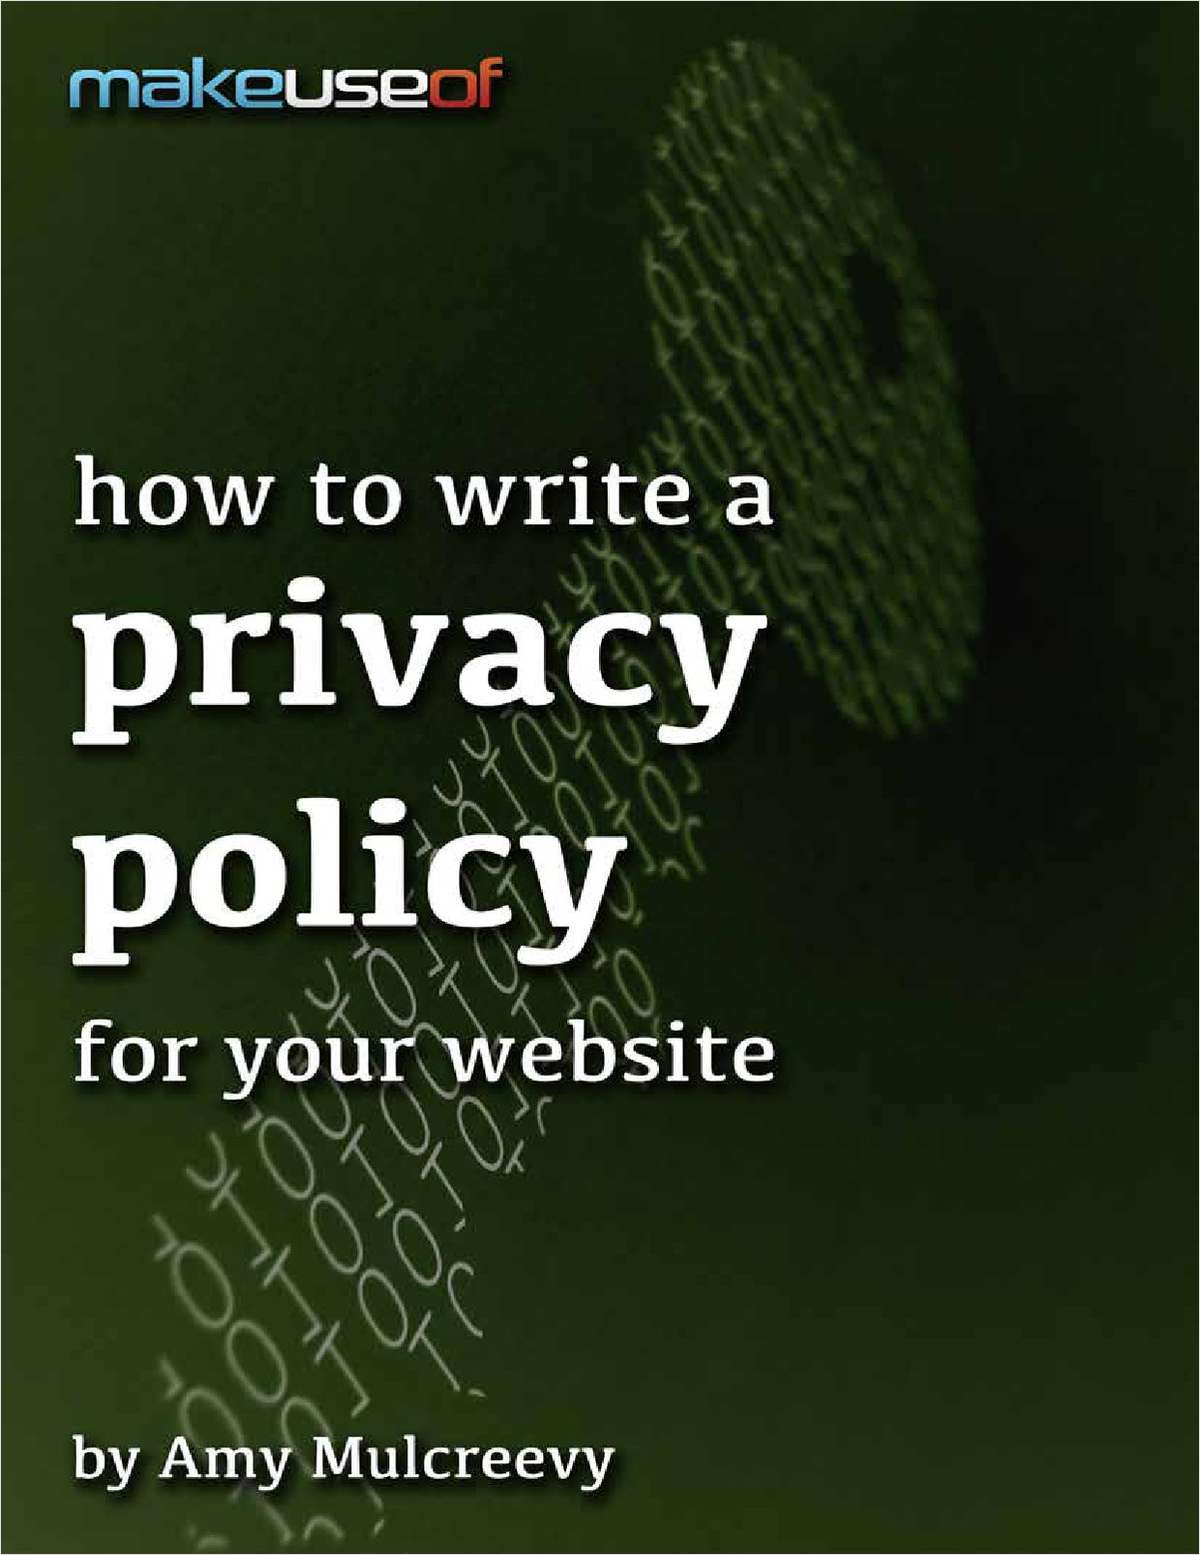 How to Write a Privacy Policy for Your Website